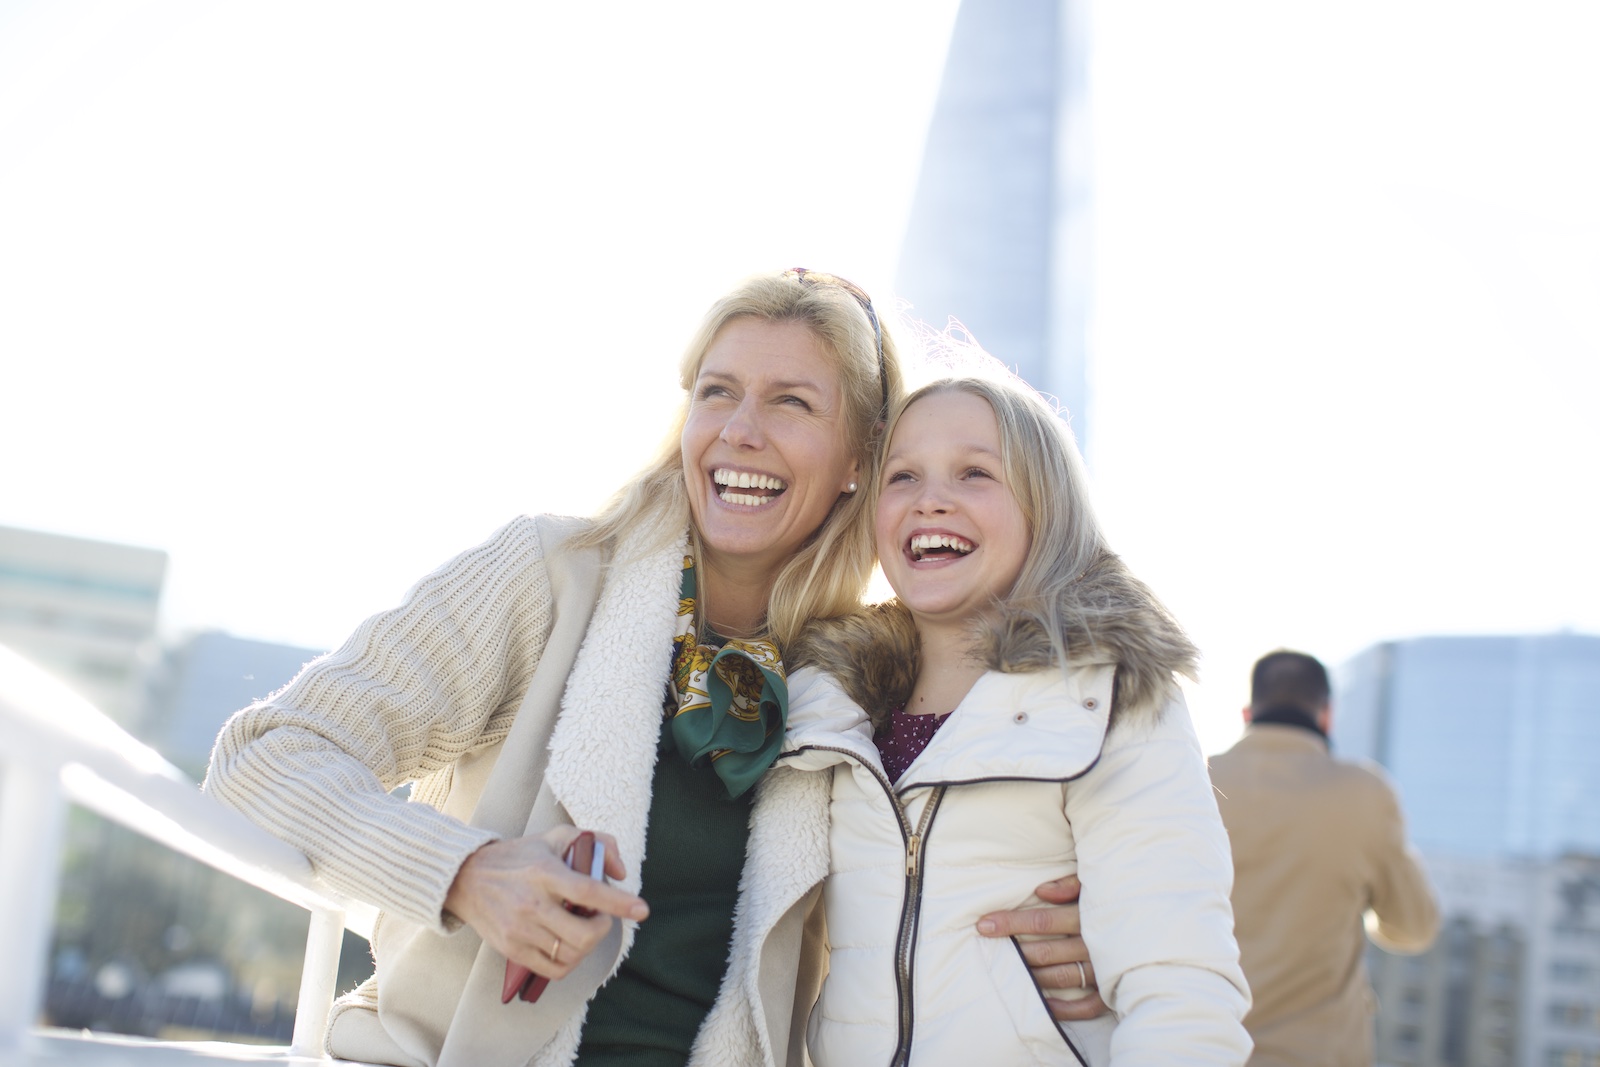 Mother and daughter on boat in London smiling.